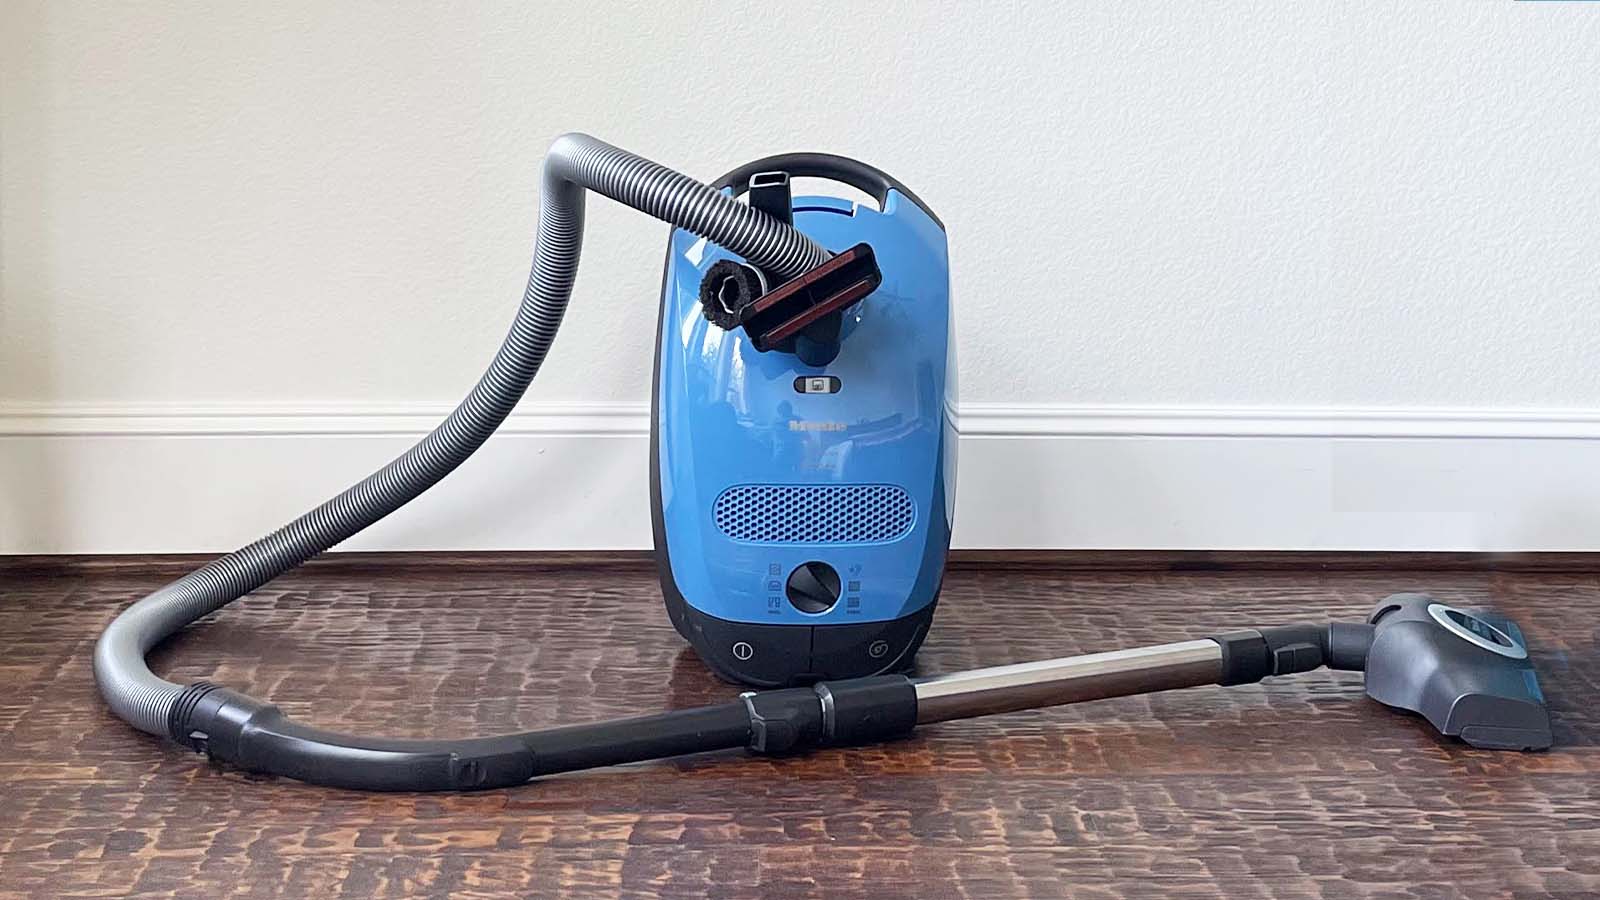 The Best Canister Vacuums In 2021 Cnn, Best Canister Vacuum For Hardwood Floors